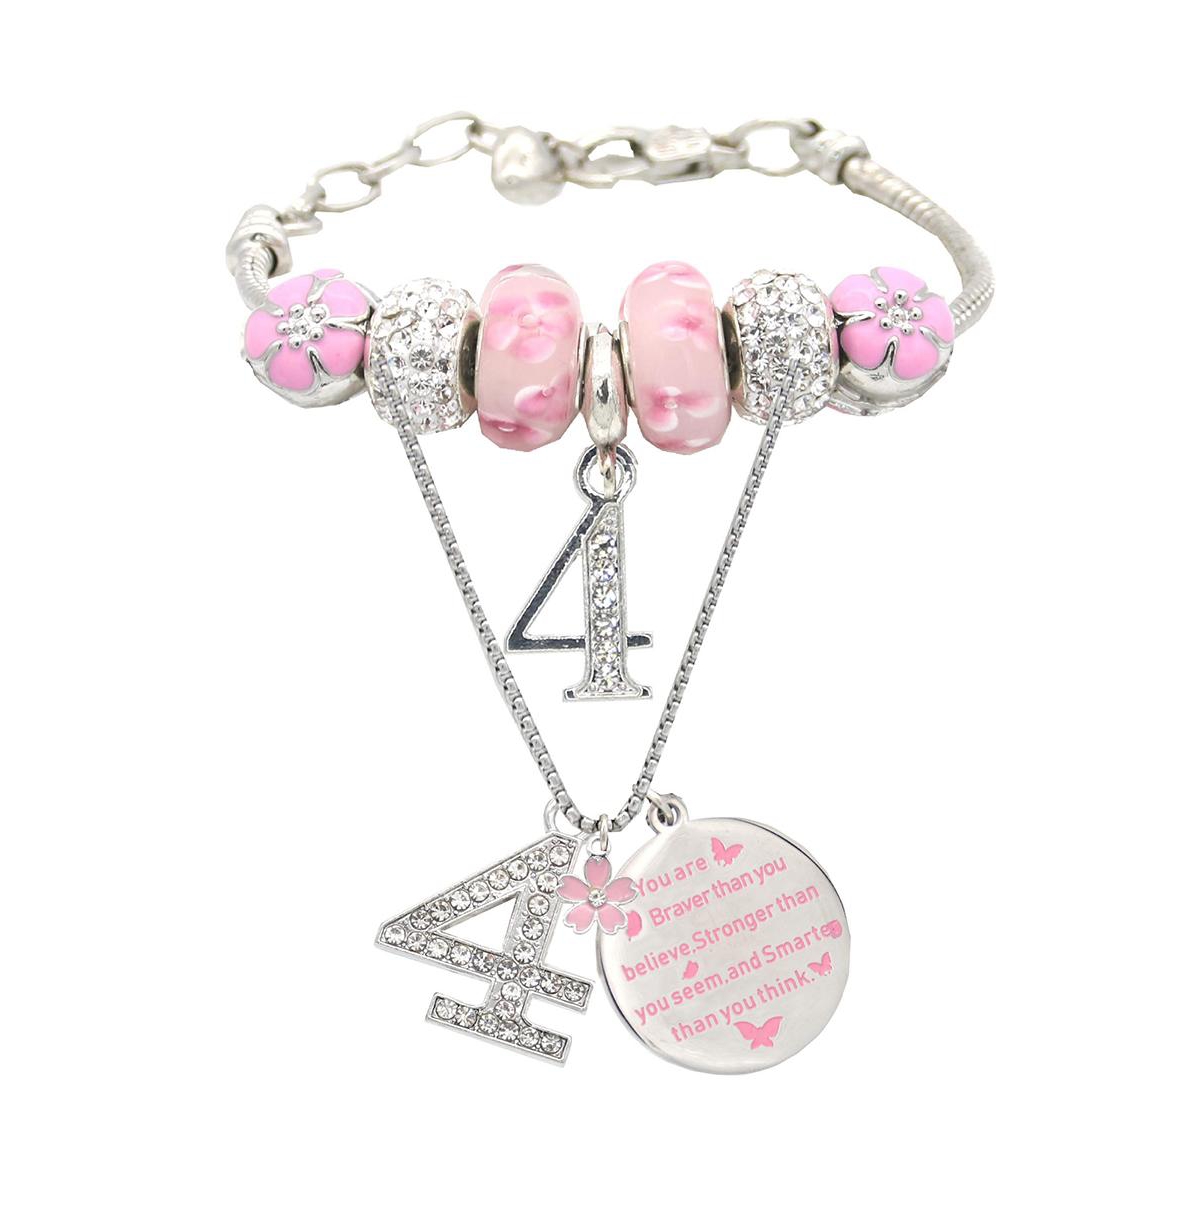 4th Birthday Gifts for Girls: Charm Bracelet, Necklace, Party Supplies, and Decorations Set - Perfect 4 Years Old Birthday Jewelry and Accessories - G